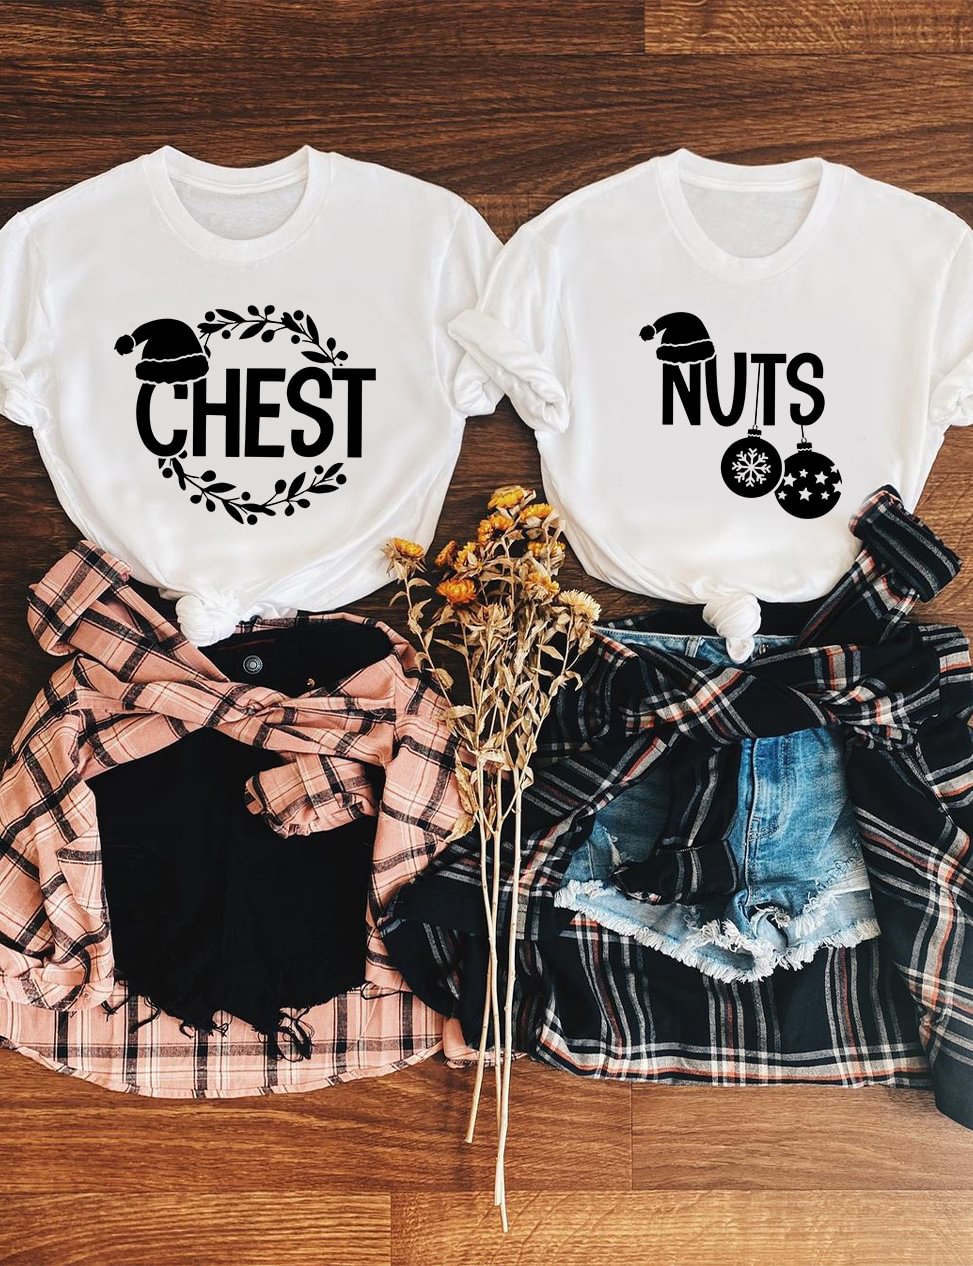 Chest Nuts Christmas T-Shirt